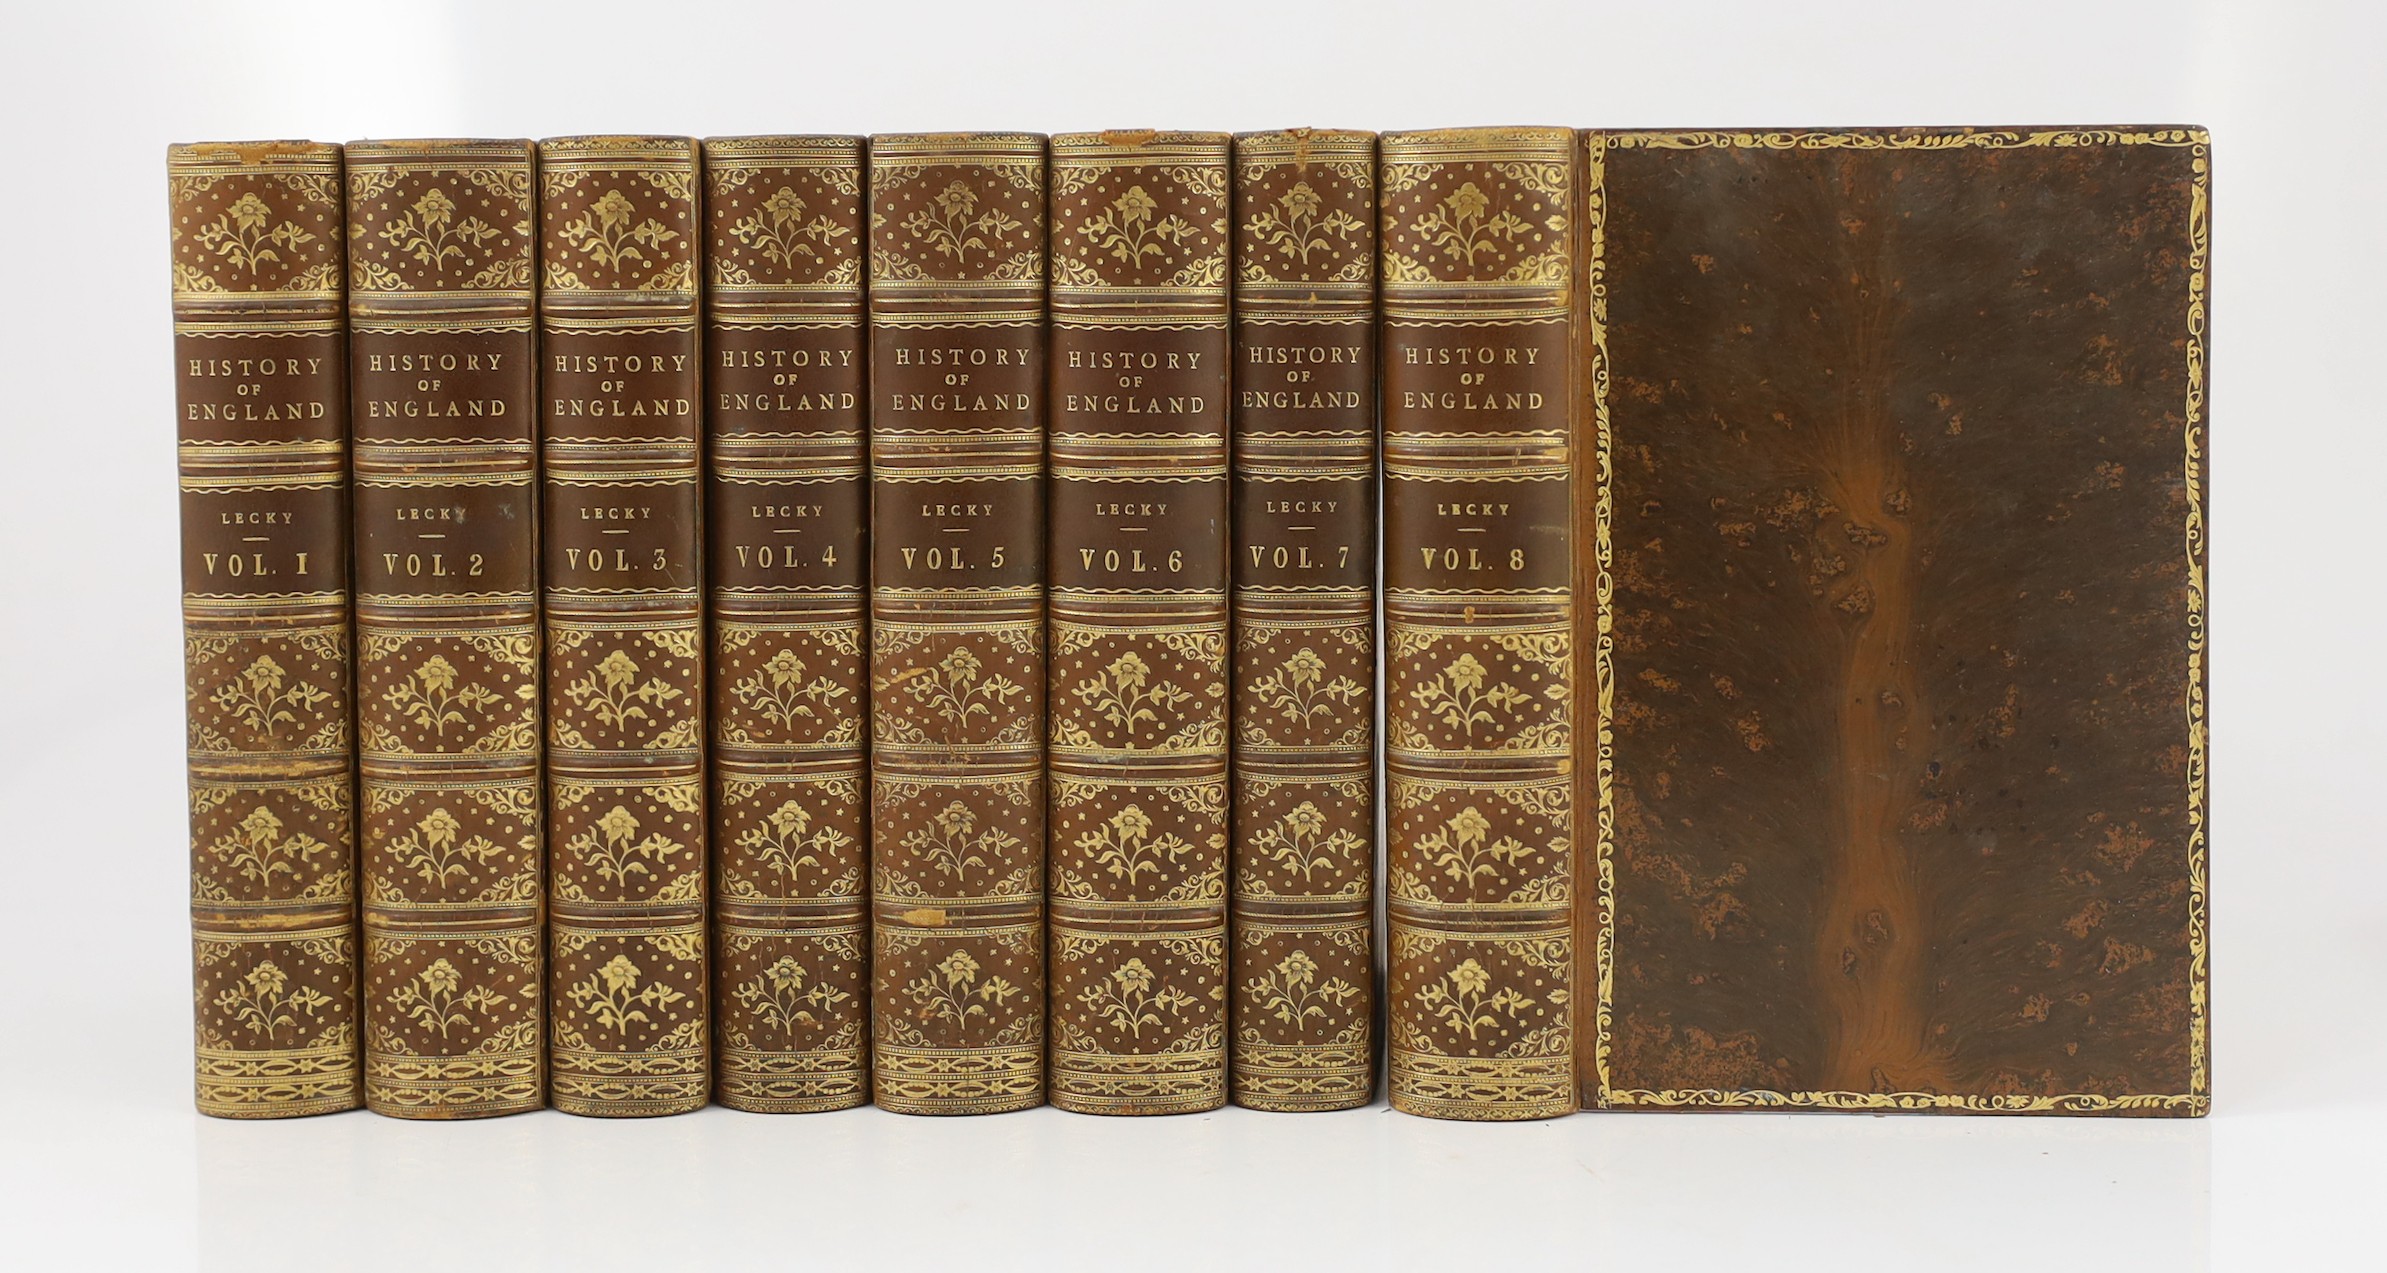 Lecky, William Edward Hartpole - A History of England in the Eighteenth Century. 8 vols. (mixed editions). contemp. tree calf, gilt-tooled covers